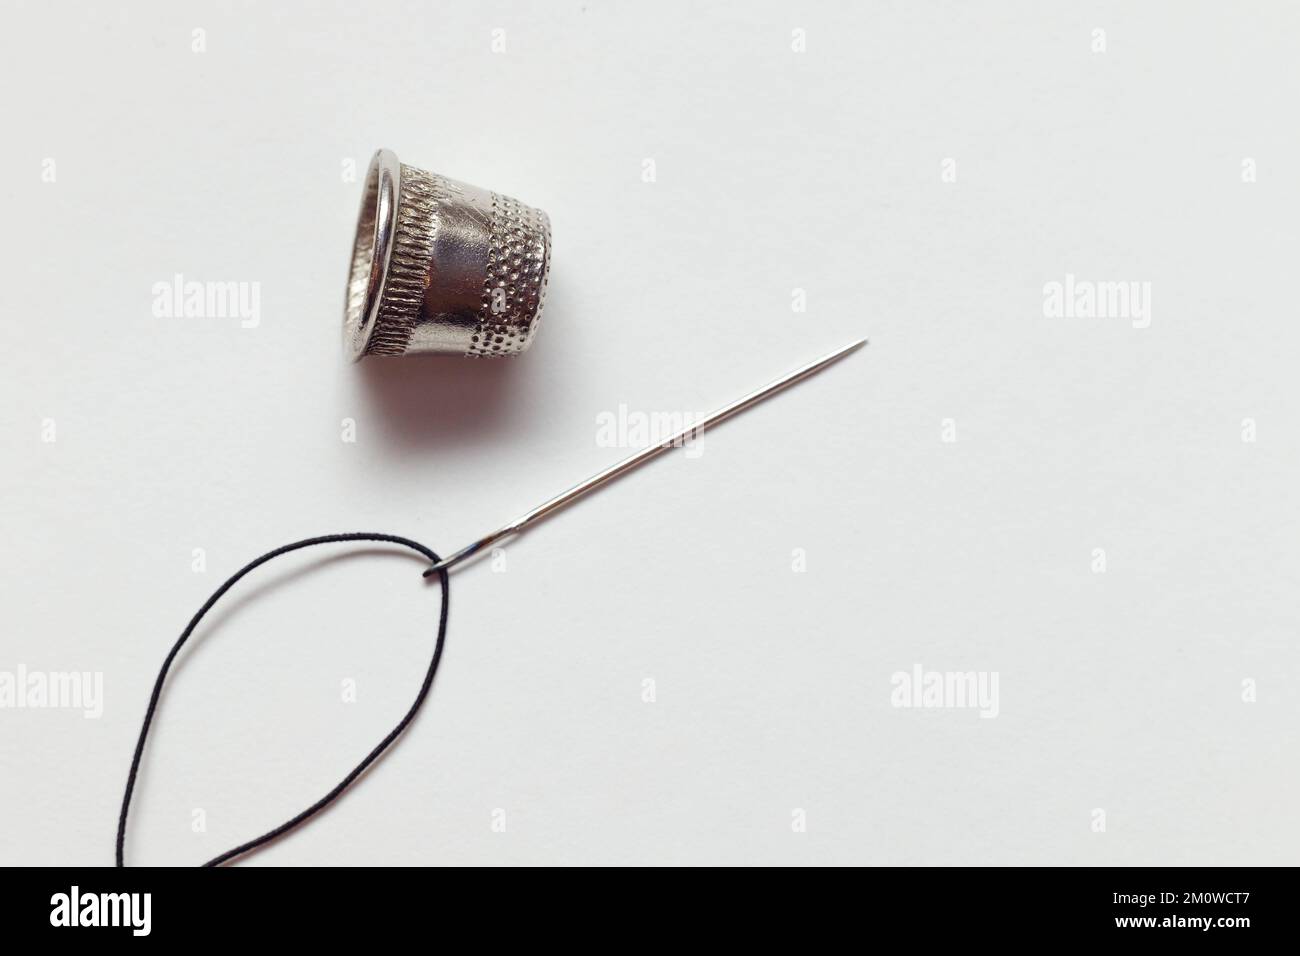 Sewing tools on white fabric background.Needle, thread, thimble and button. Horizontal composition. Top view Stock Photo